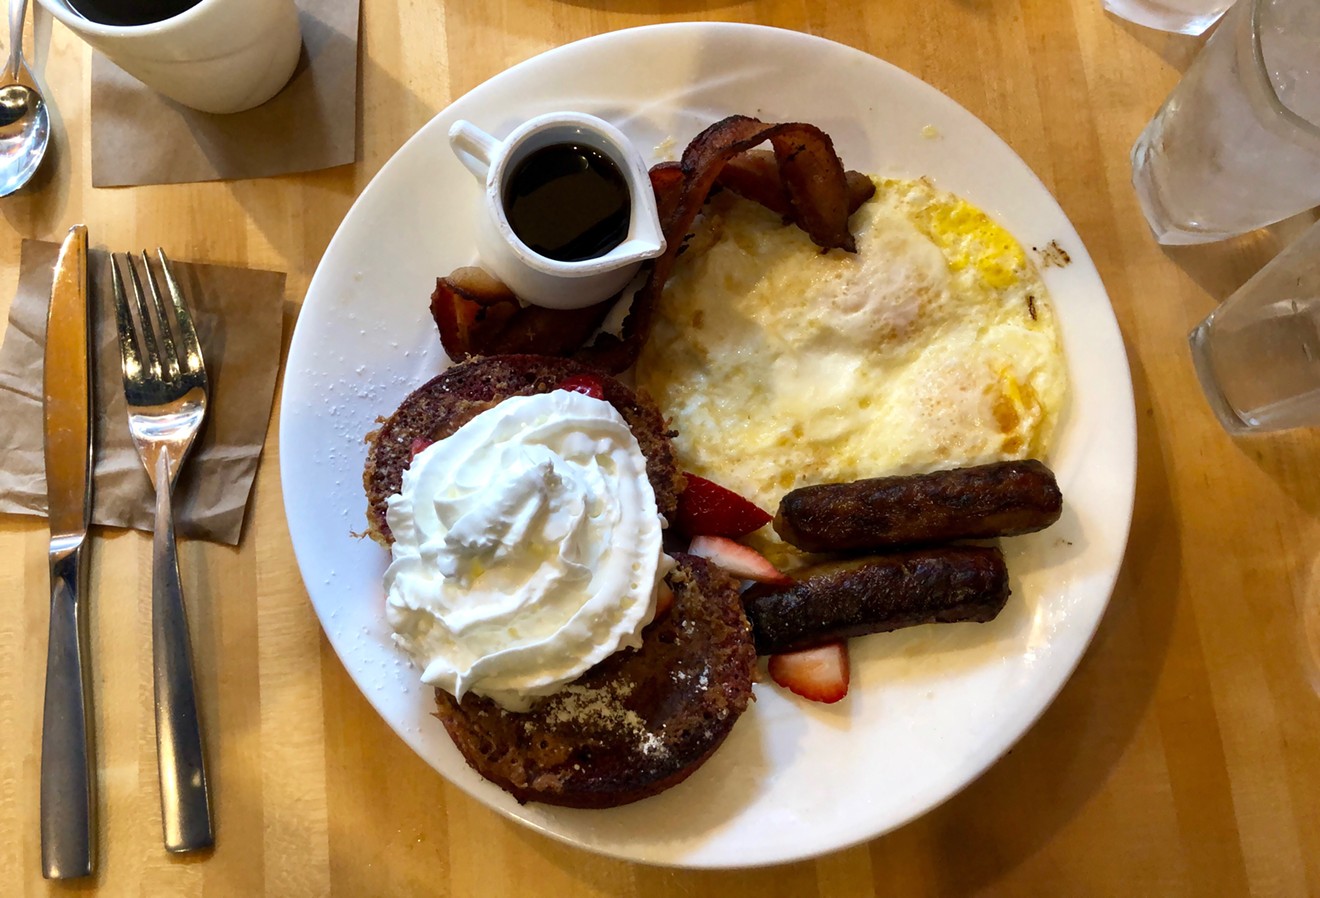 The Yolk All-Star Combo ($11) is standard breakfast executed just right. The upgrade to red velvet French toast doesn’t hurt, either.